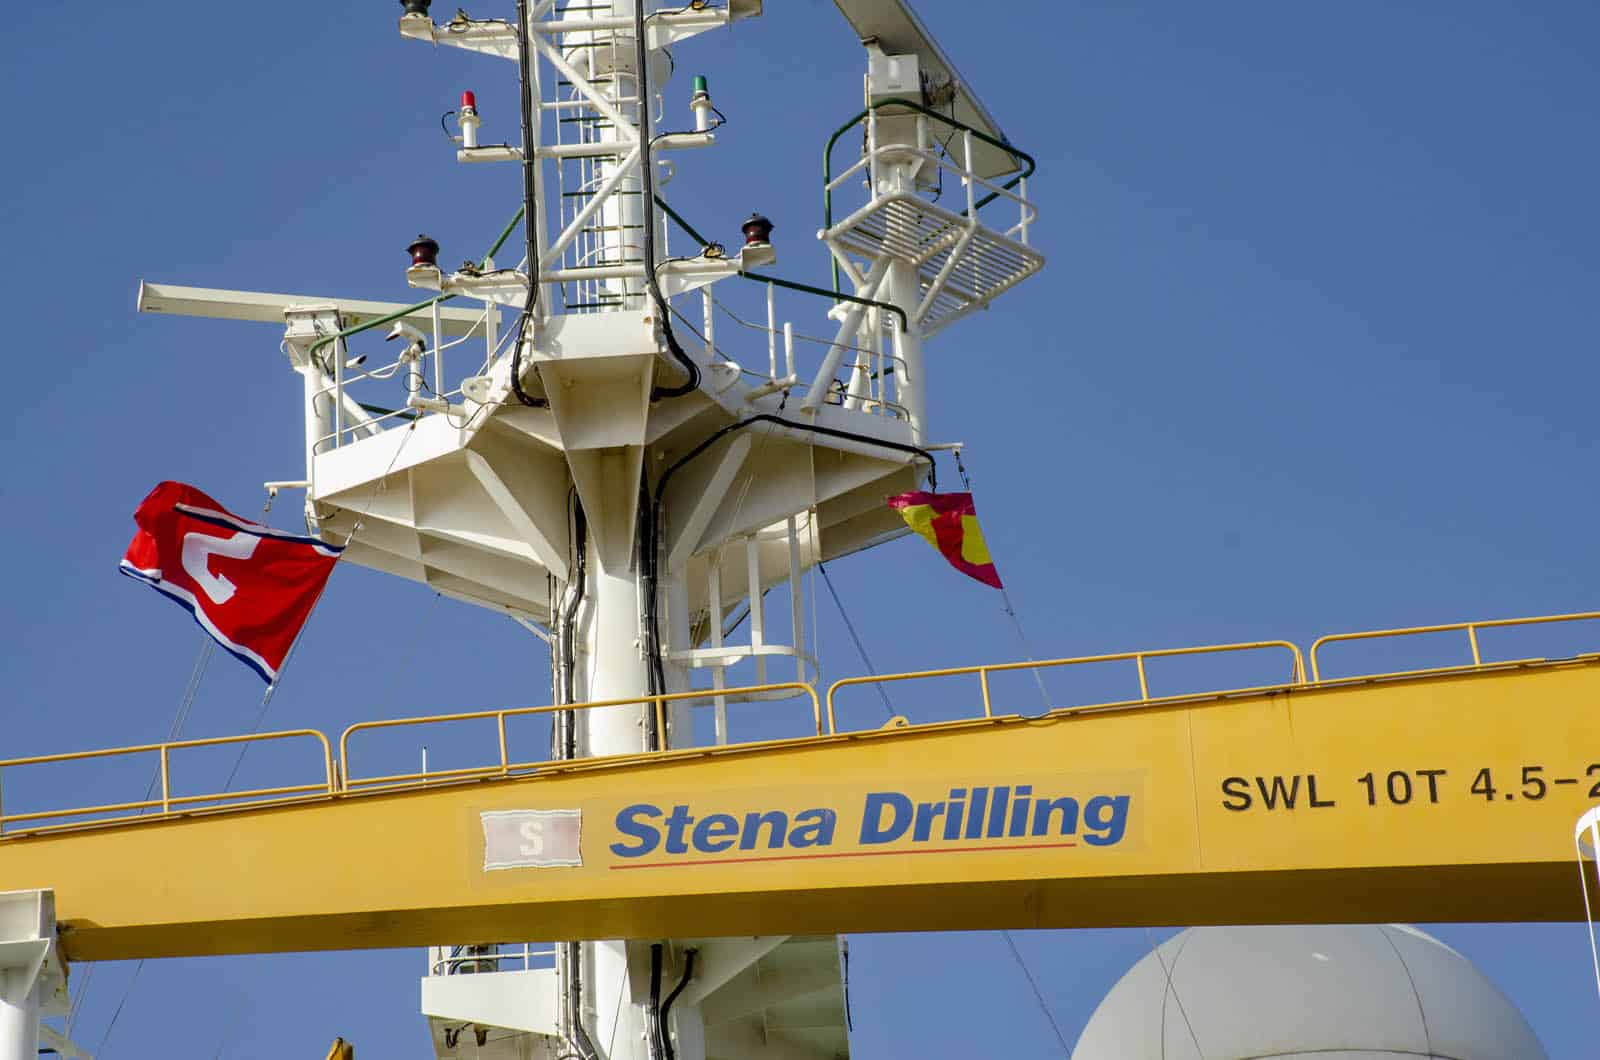 Stena Drilling logo and label in a platform with flags